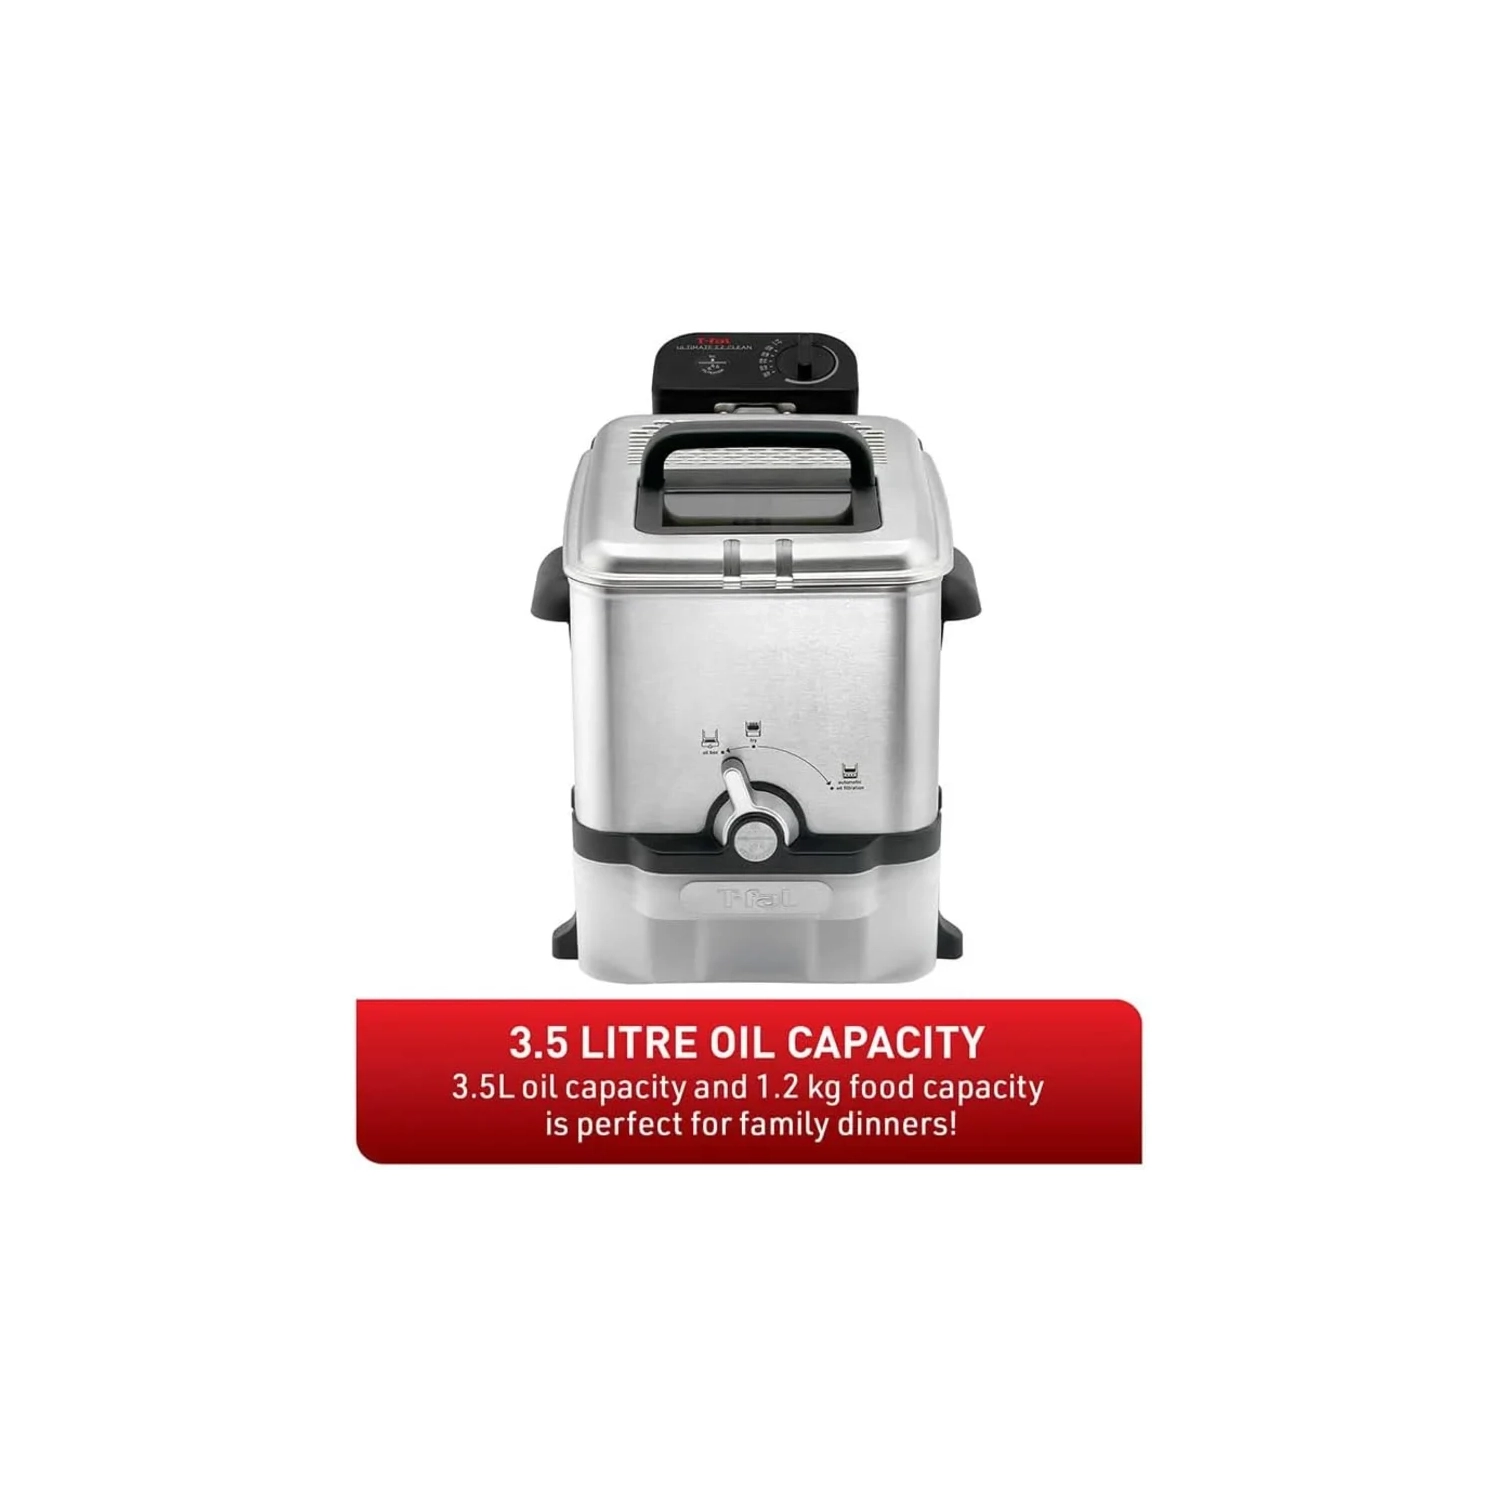 Ultimate EZ Clean Deep Fryer - 3.5L Stainless Steel Friteuse with 